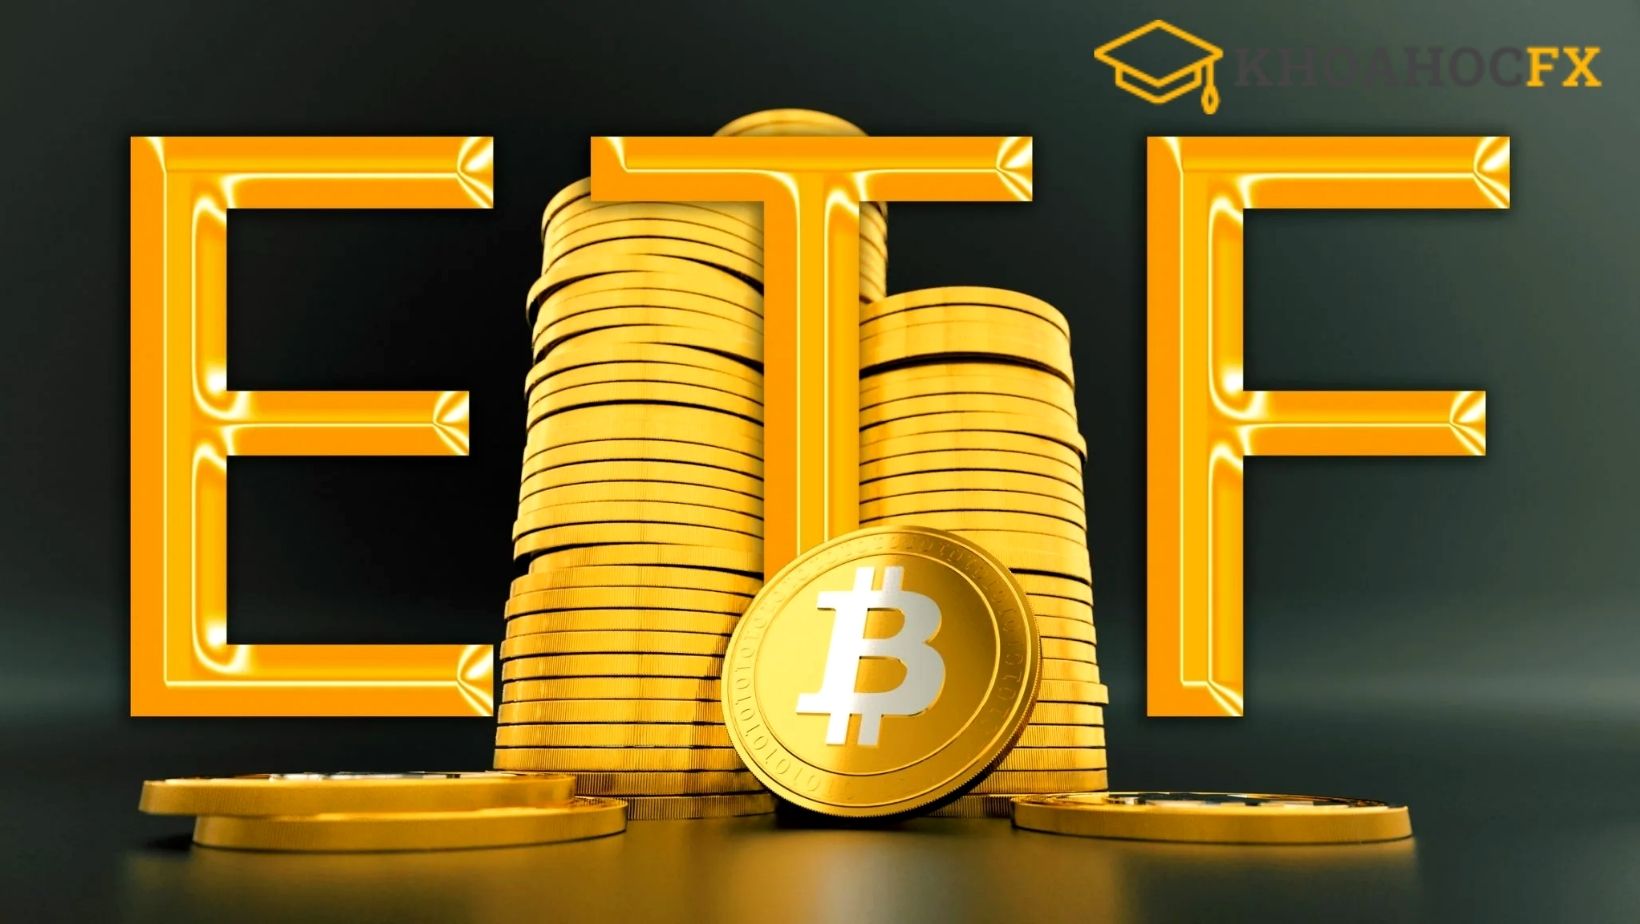 Giao dịch ETF